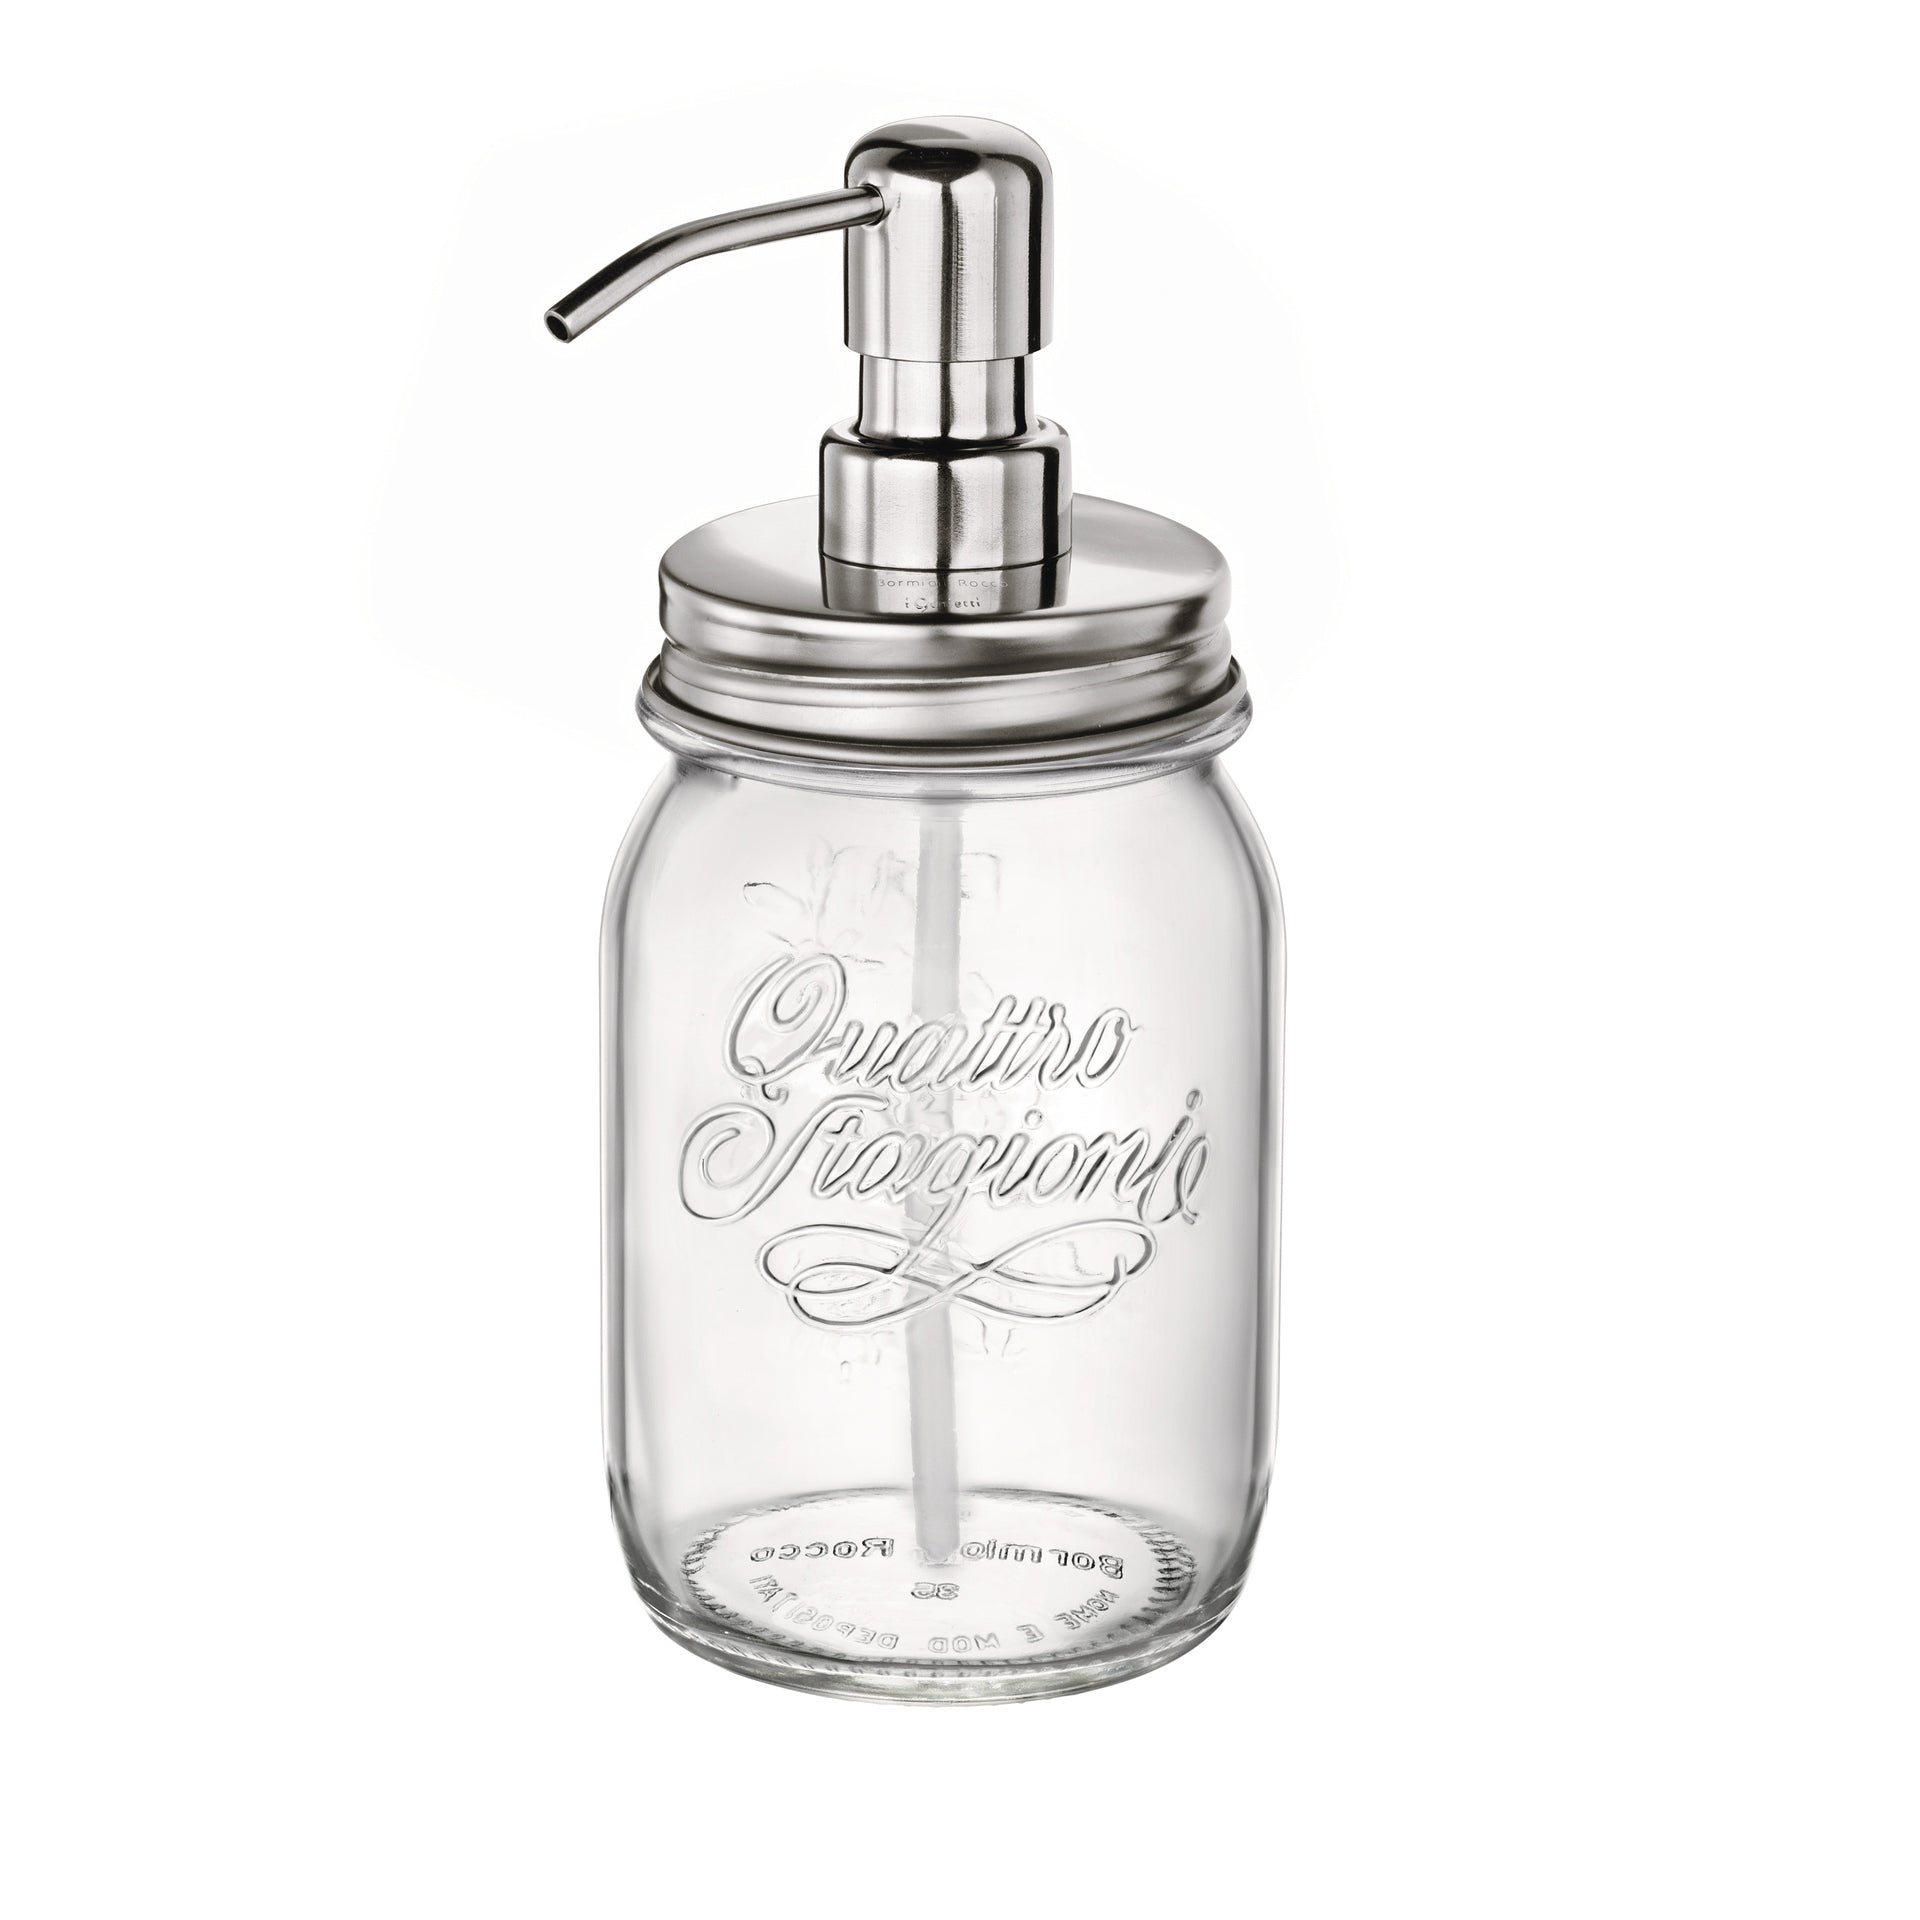 Quattro Stagioni 17 oz. Jar with Stainless Steel Pump (Set of 12)